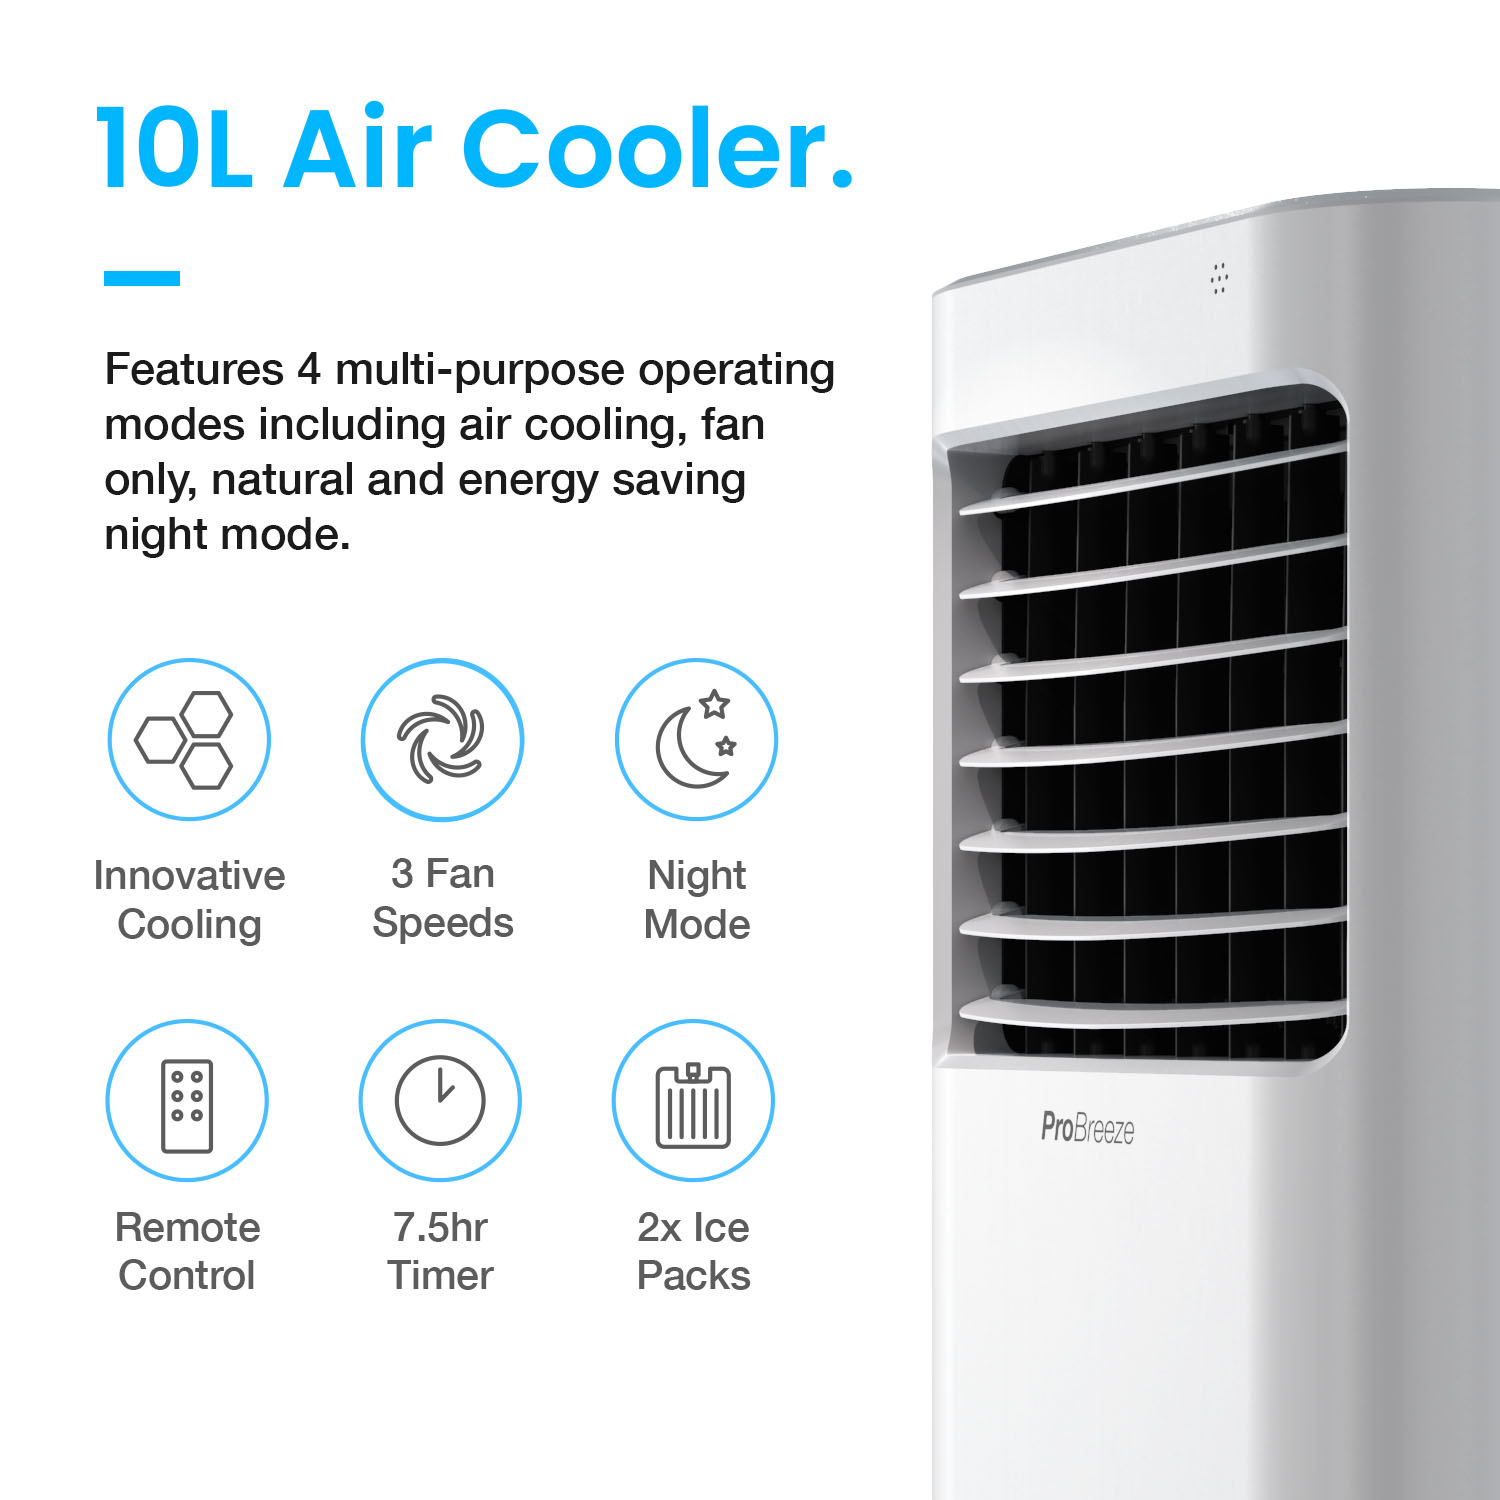 10l Portable Air Cooler Next Day Delivery Probreeze throughout proportions 1500 X 1500